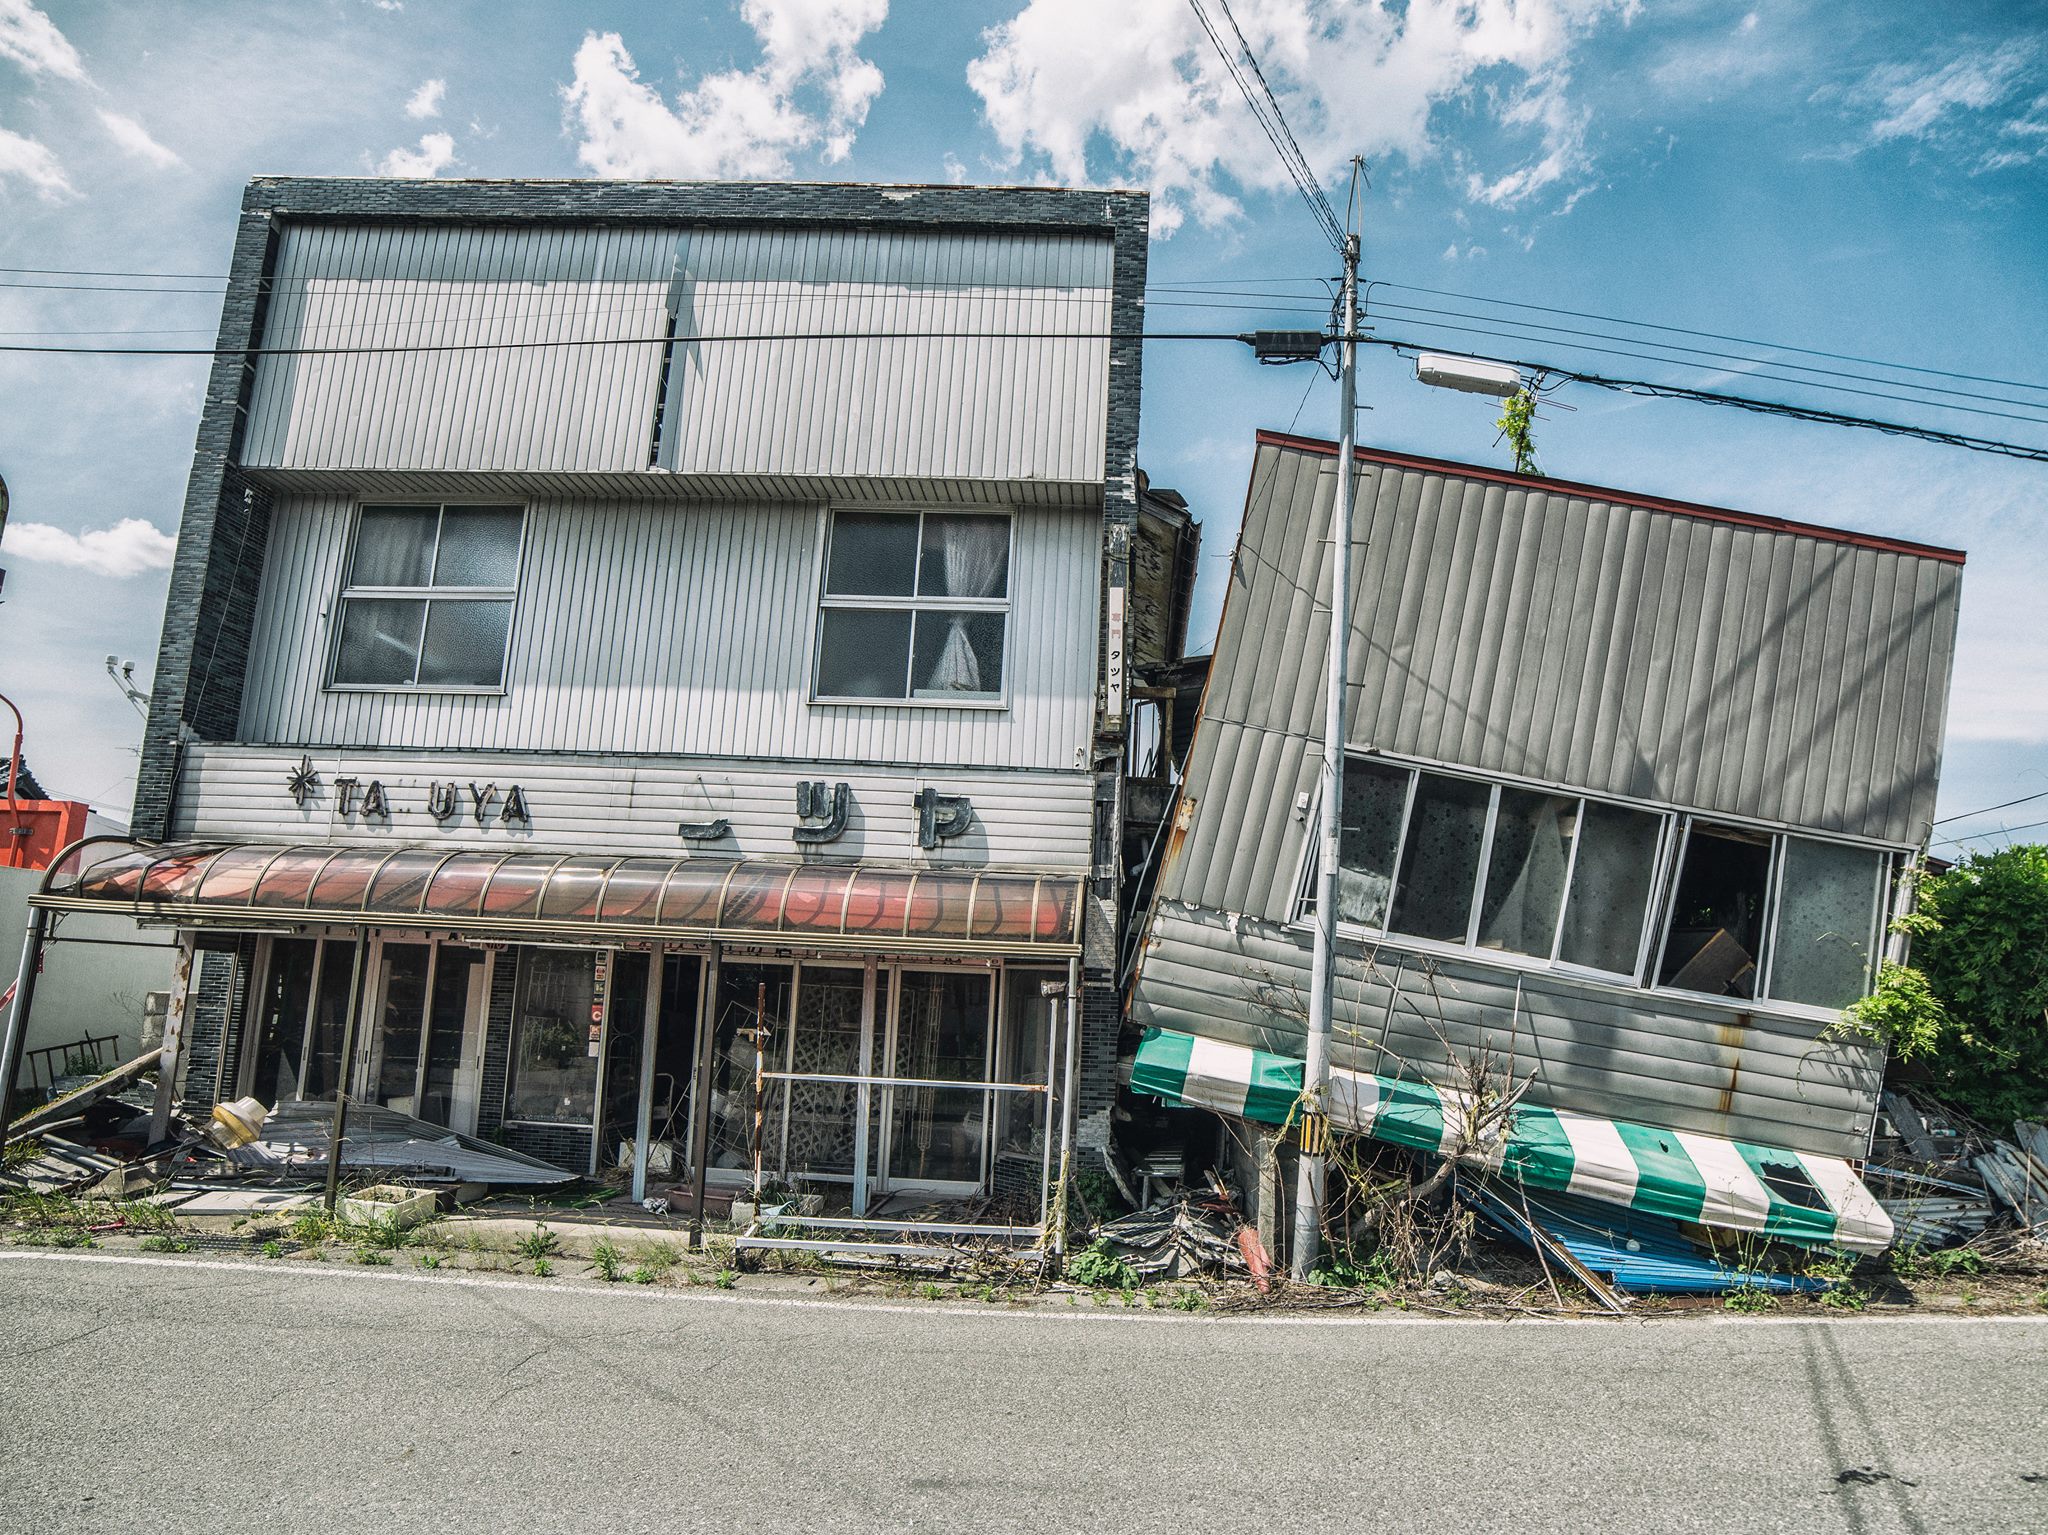 Collapsed buildings in Fukushima. Courtesy of Keow Wee Loong.